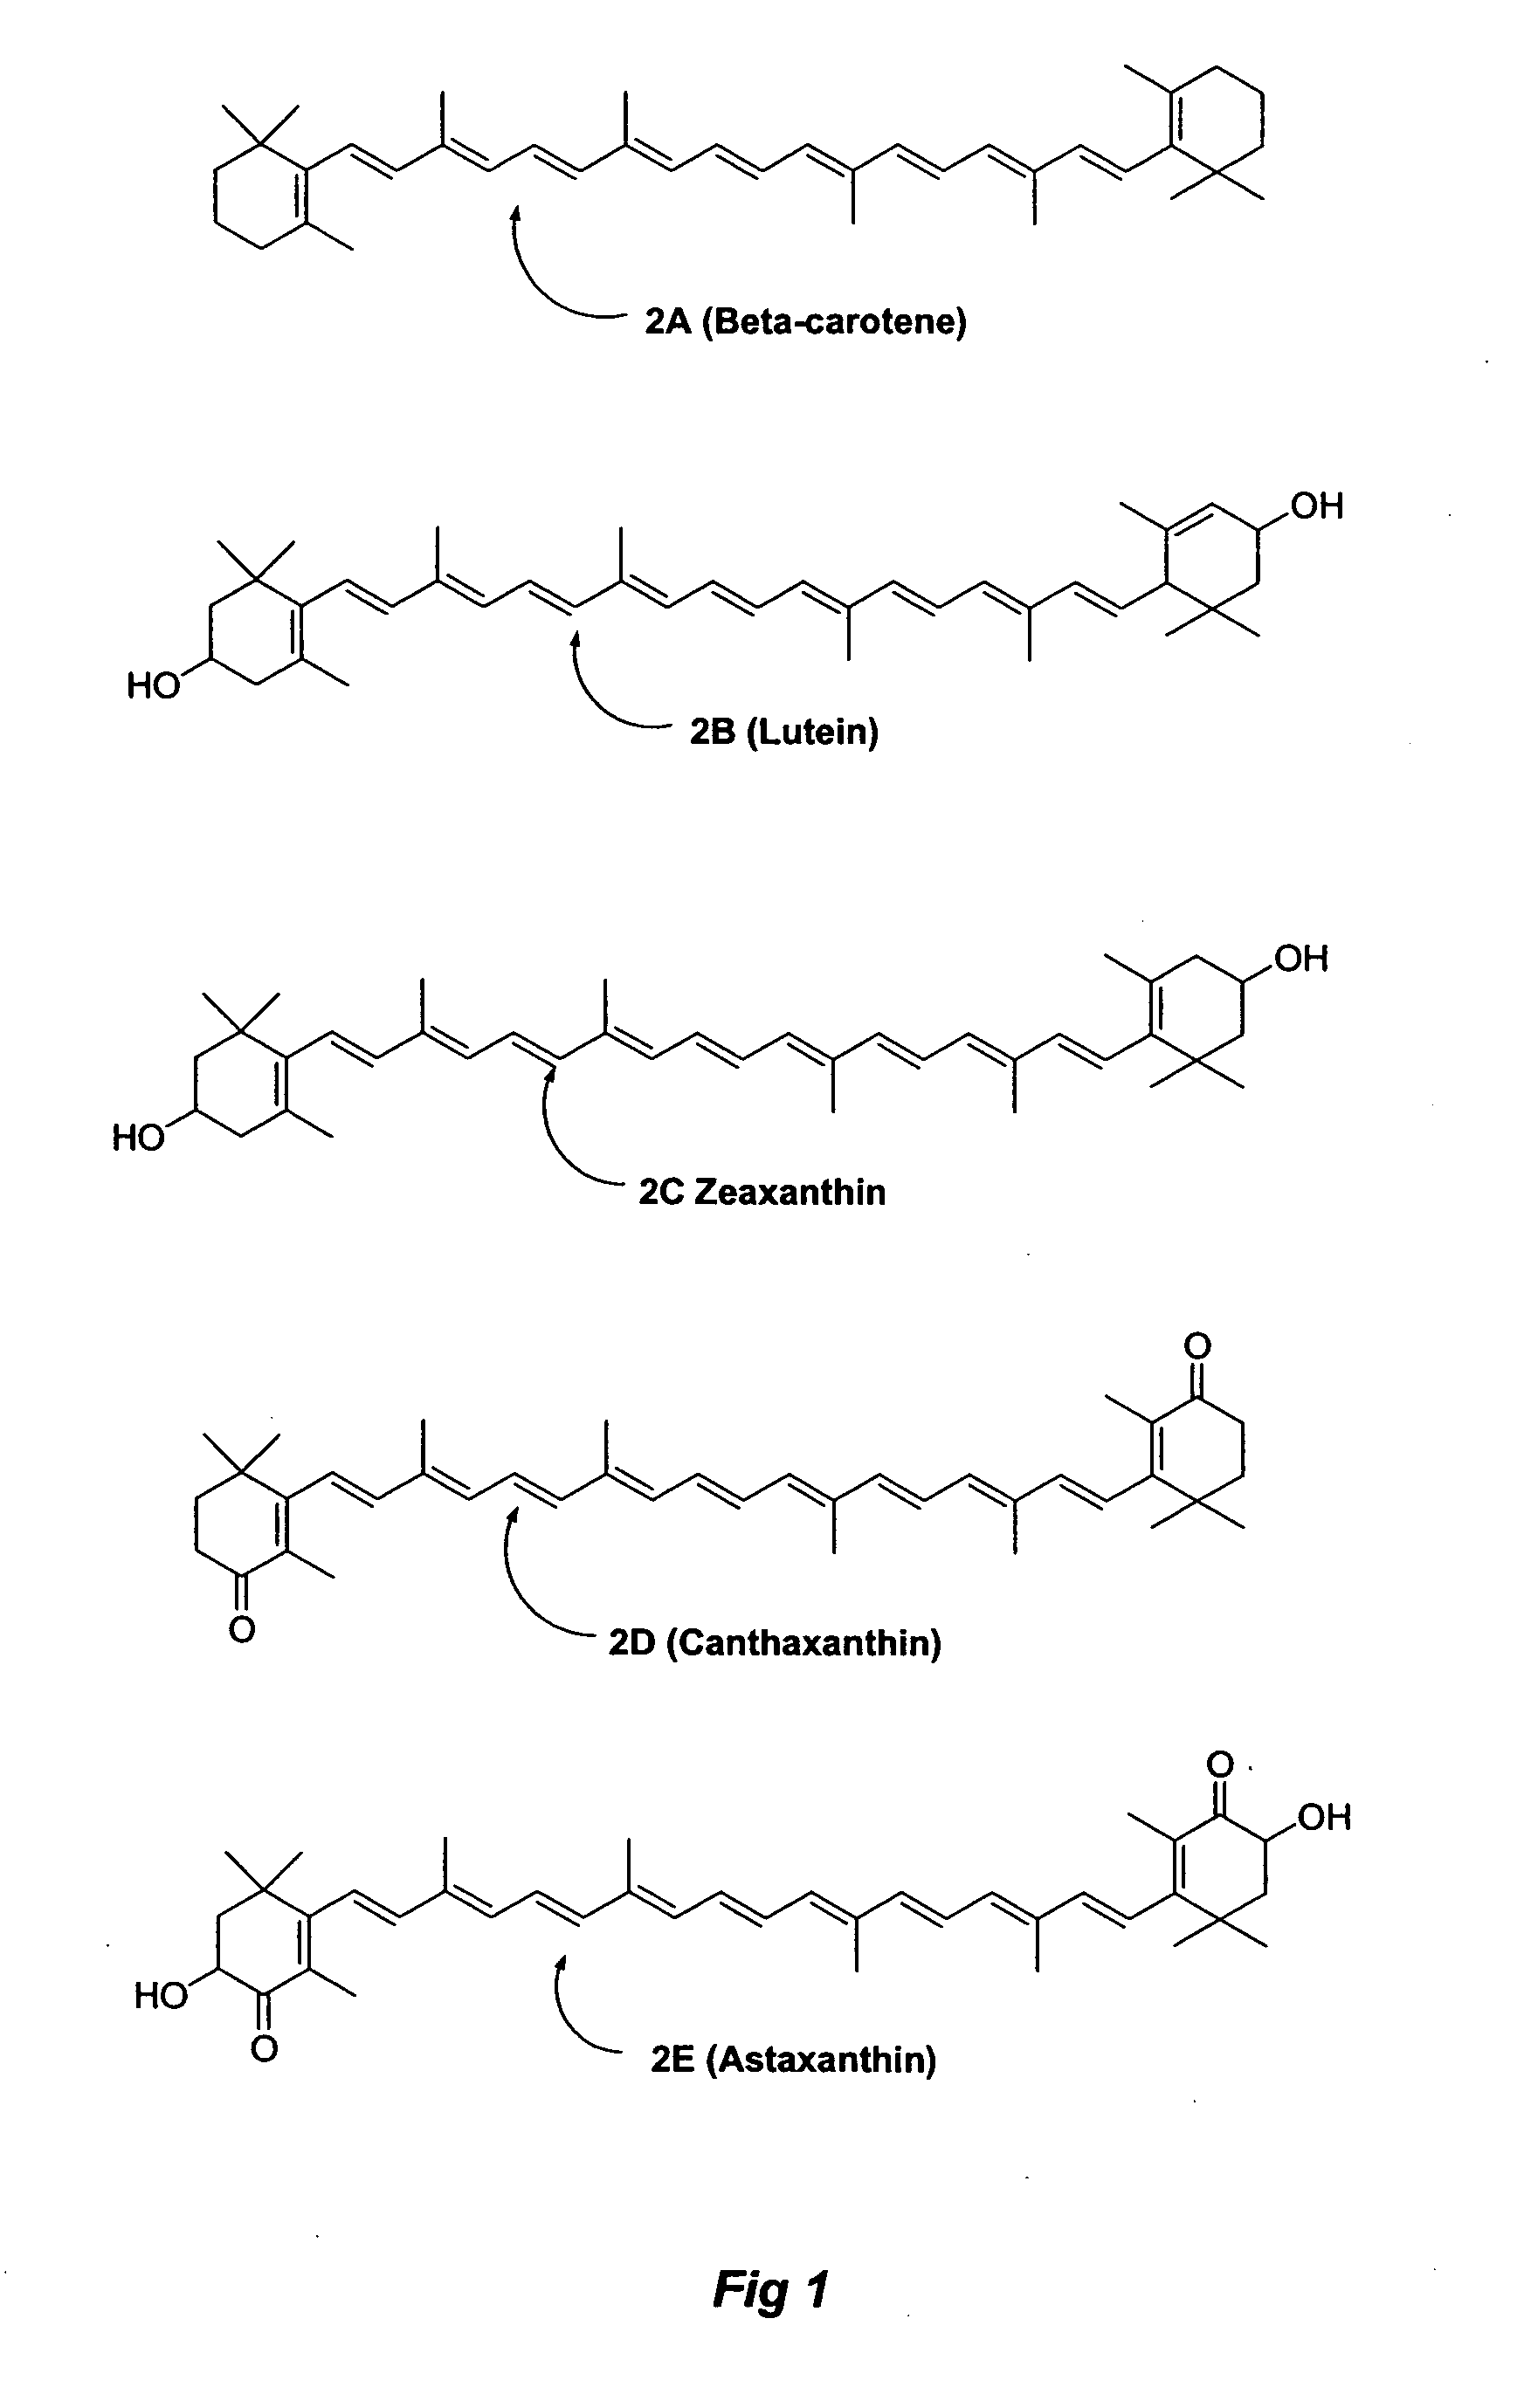 Carotenoid analogs or derivatives for the inhibition and amelioration of liver disease